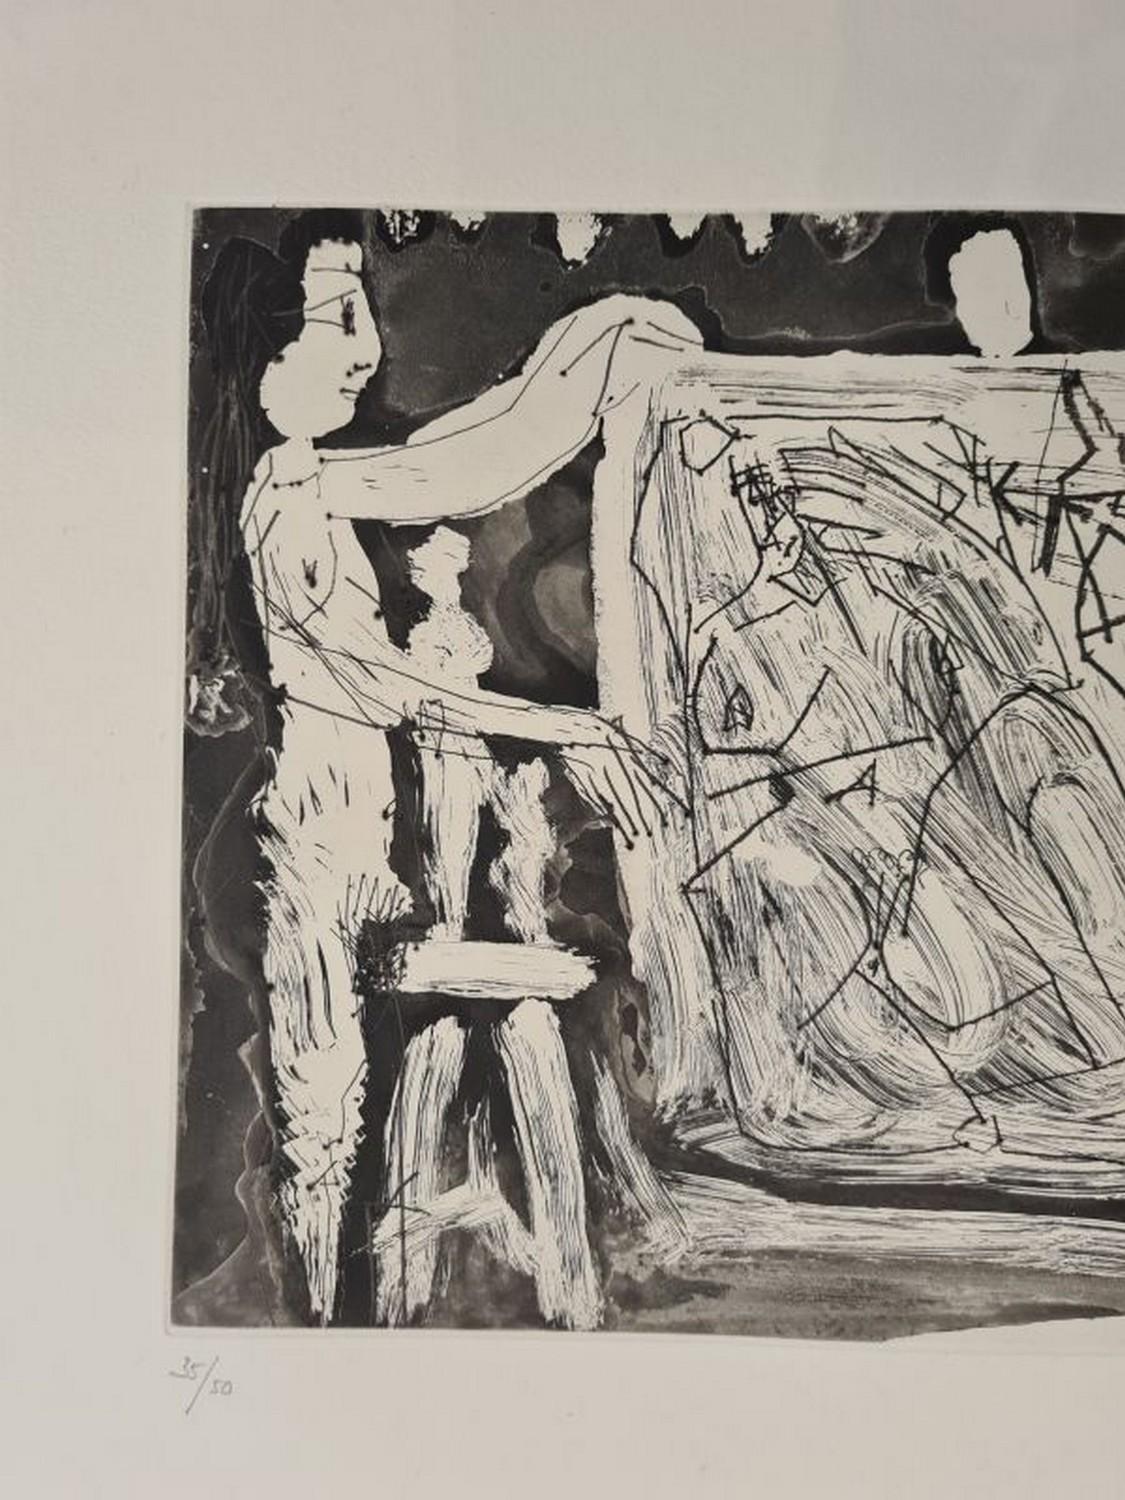 In the studio: two models with a large canvas and sculptures  - Print by Pablo Picasso